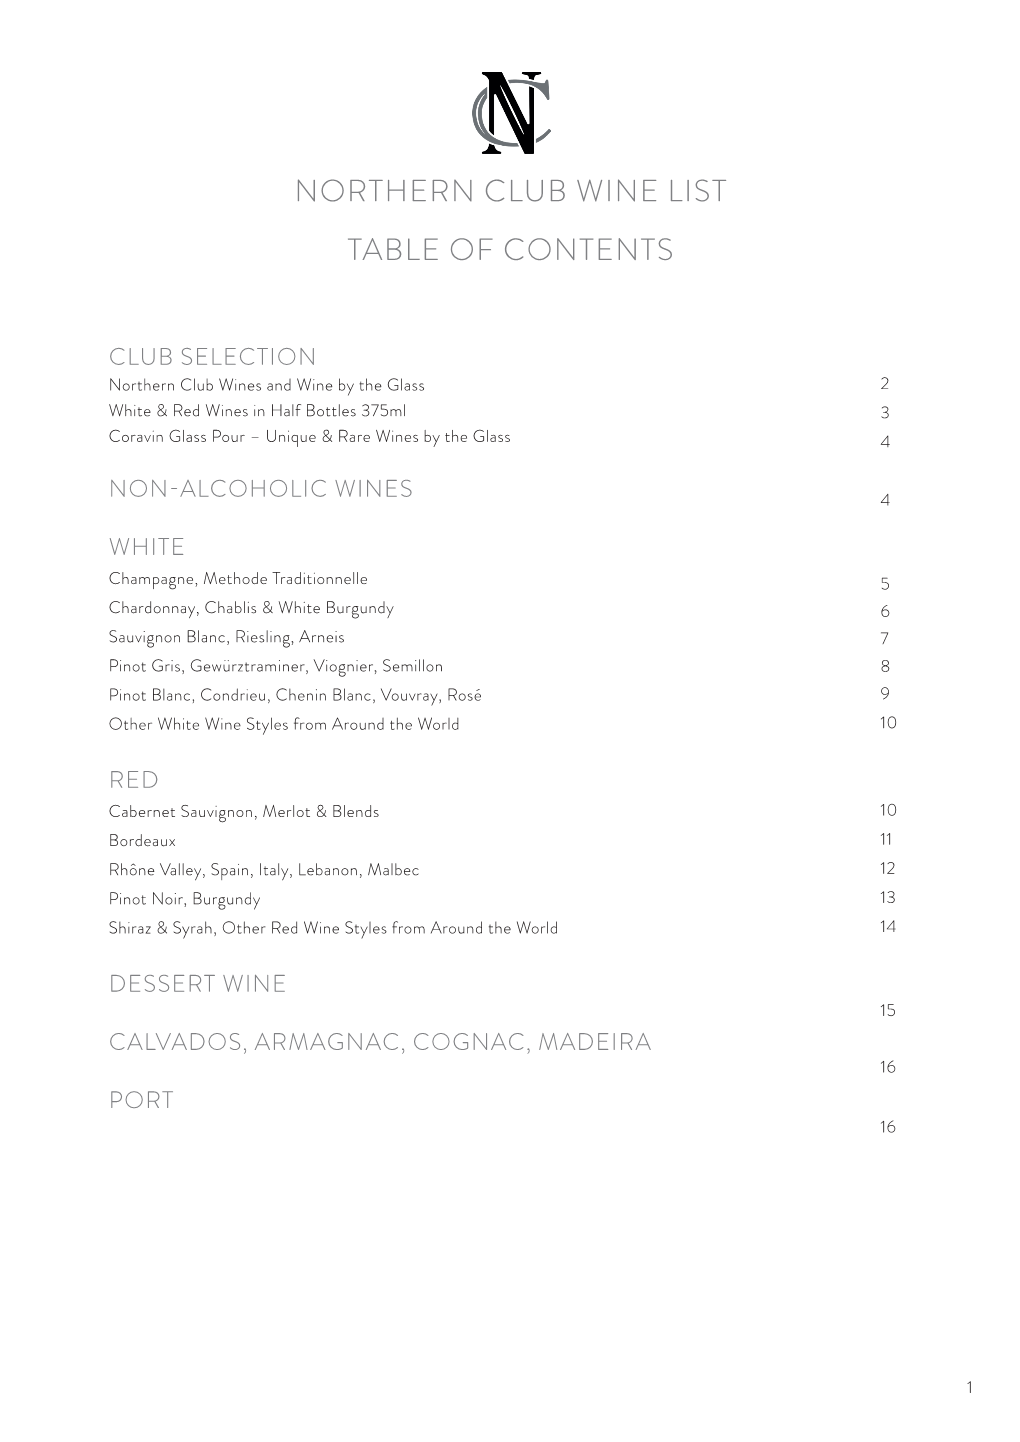 Northern Club Wine List Table of Contents